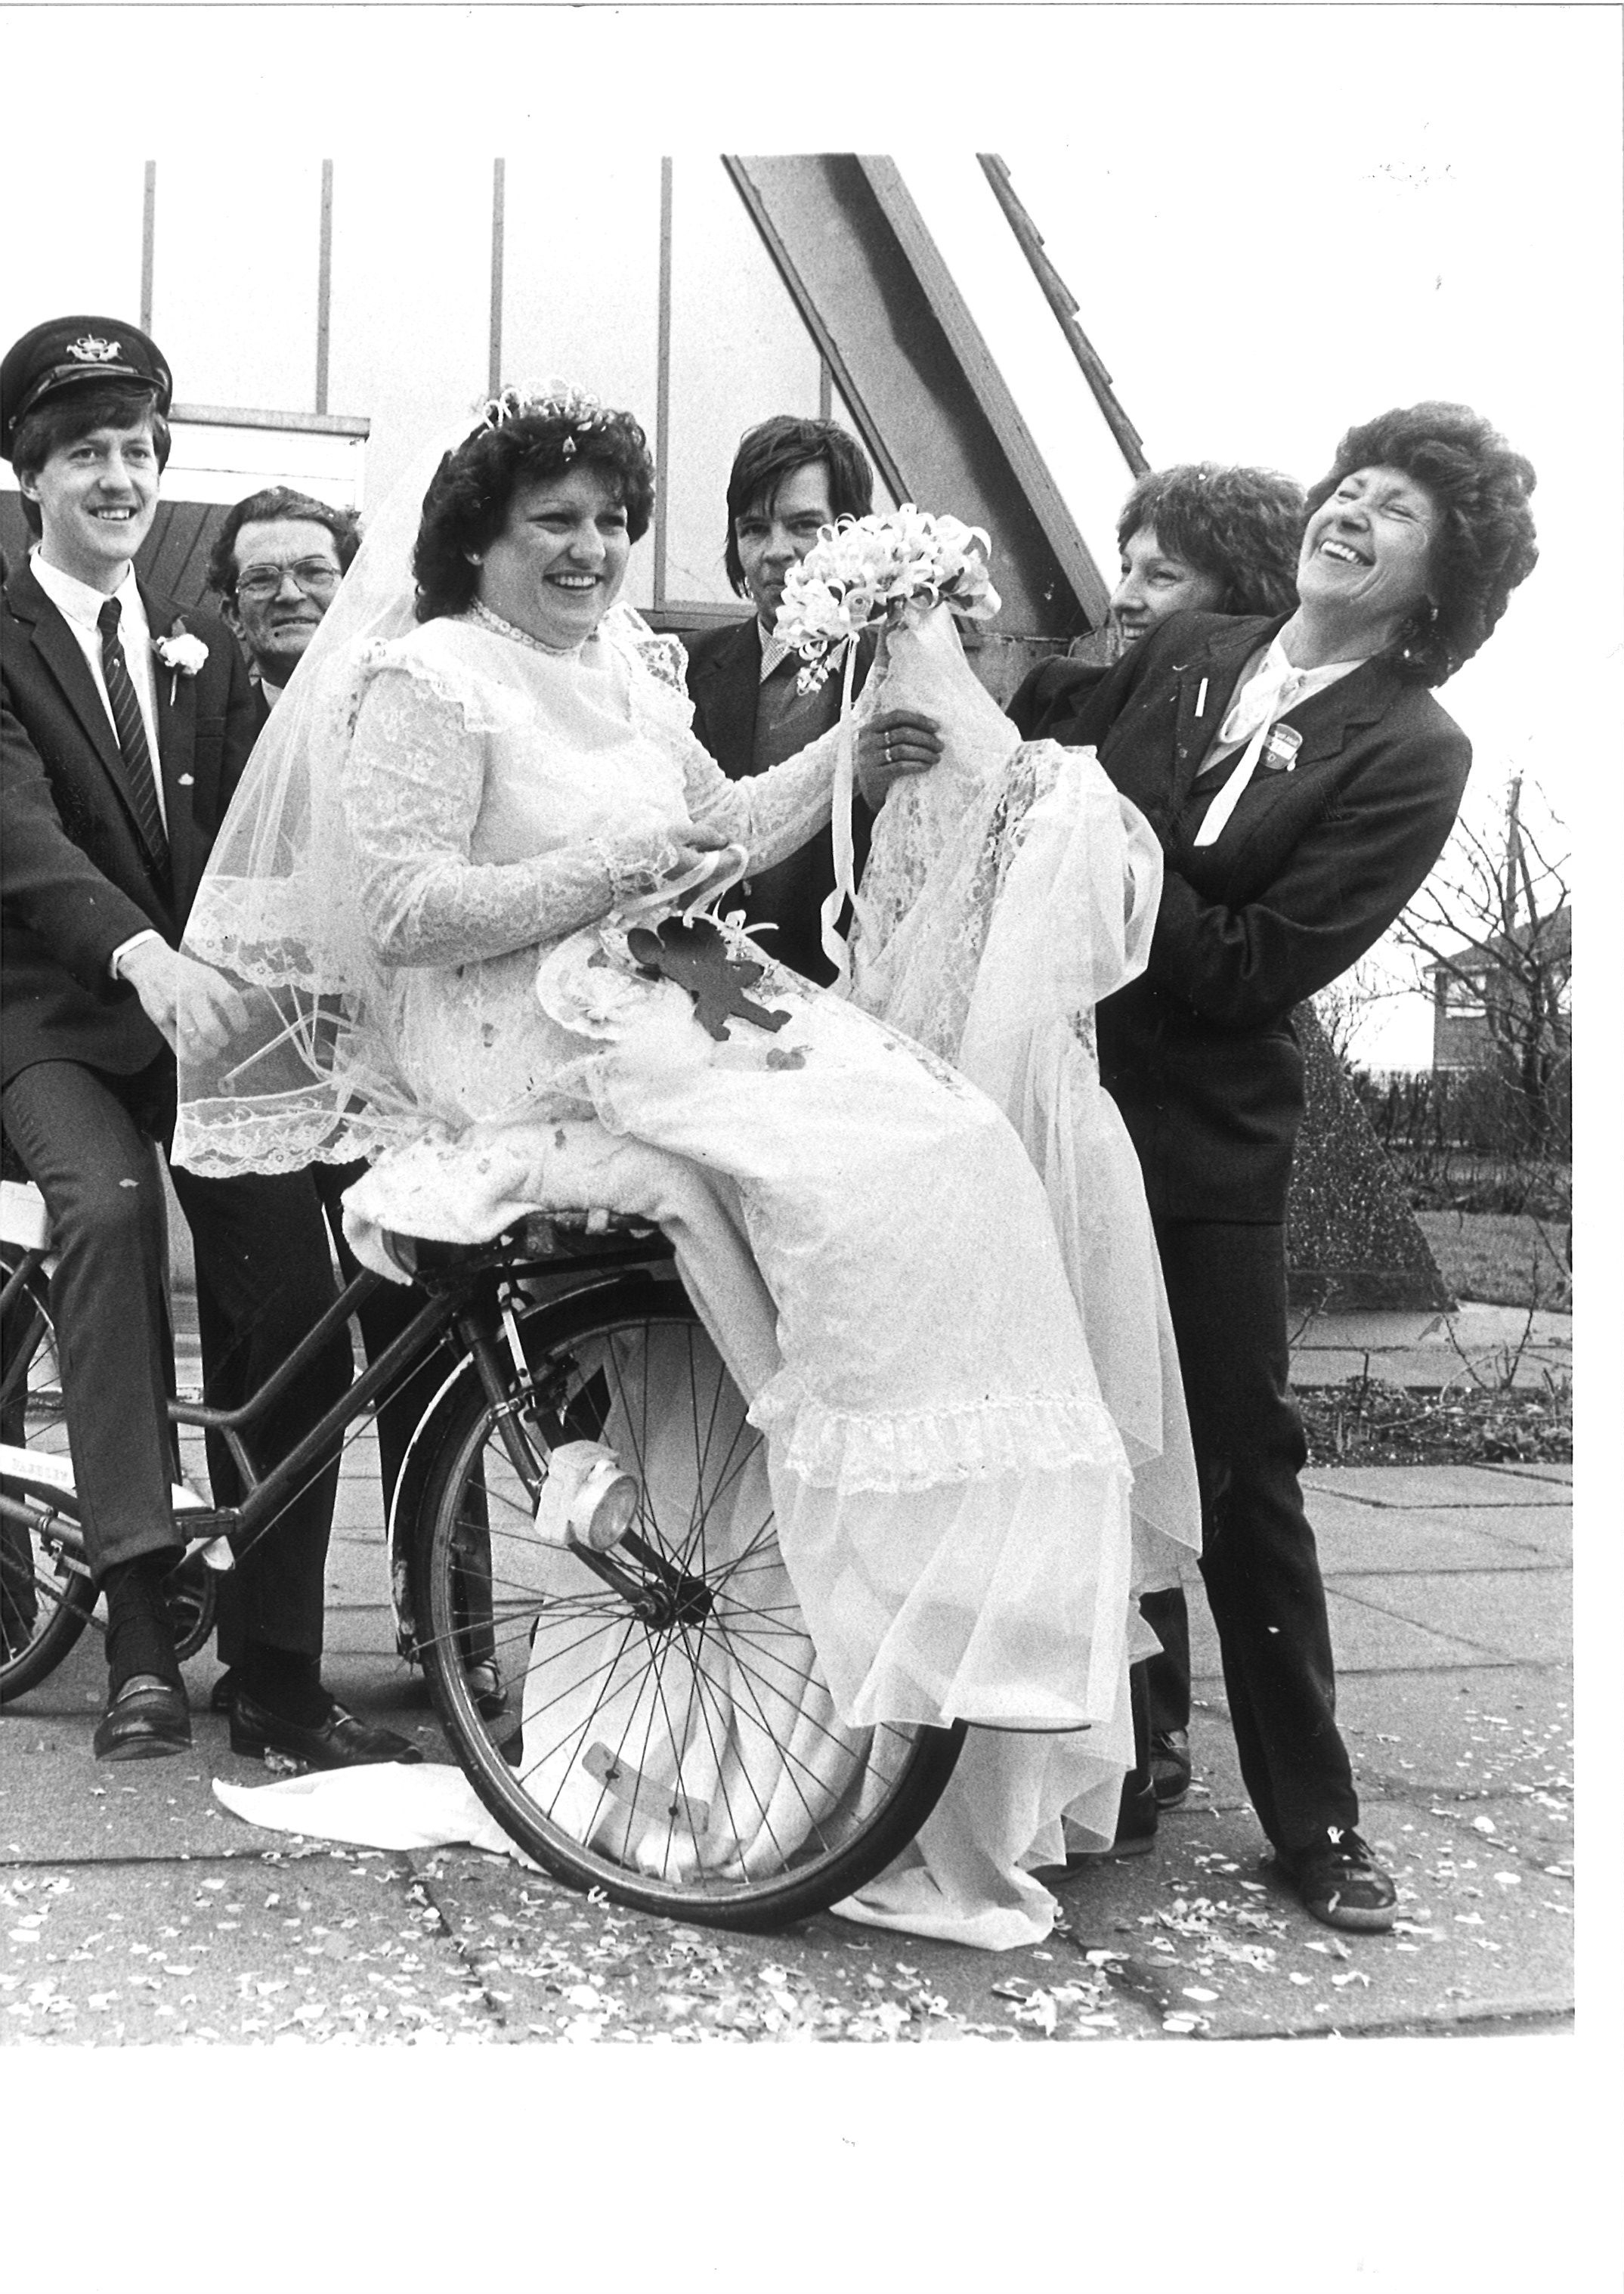 Happy - Colin May married Jane Stanlake at St Nicholas Church, Canvey, in February 1984 and he emerged from the church to find his fellow posties had formed a surprise guard of honour with their bicycles